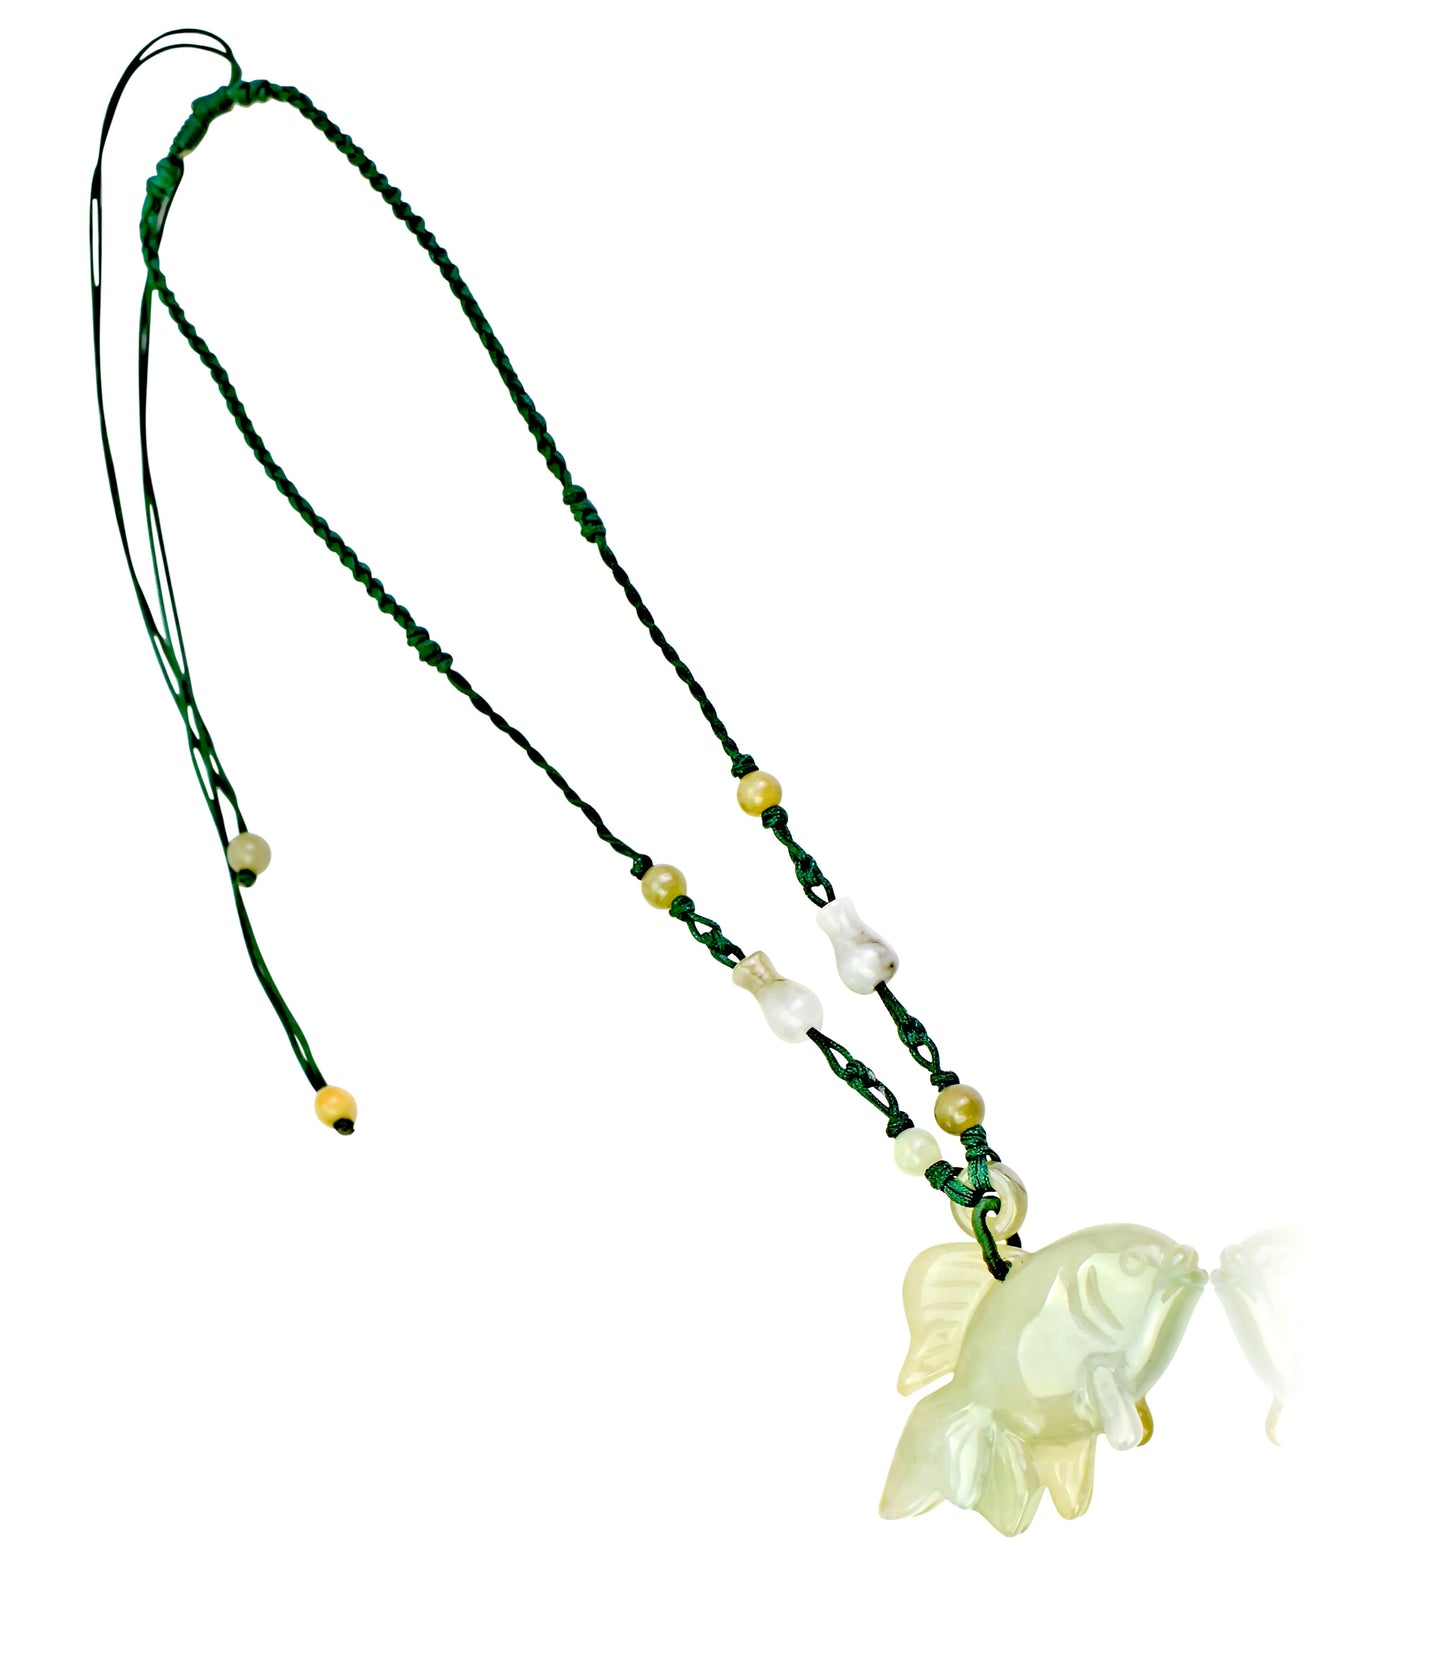 Accessorize in Style with a Hand Carved Crown Tail Fish Jade Pendant